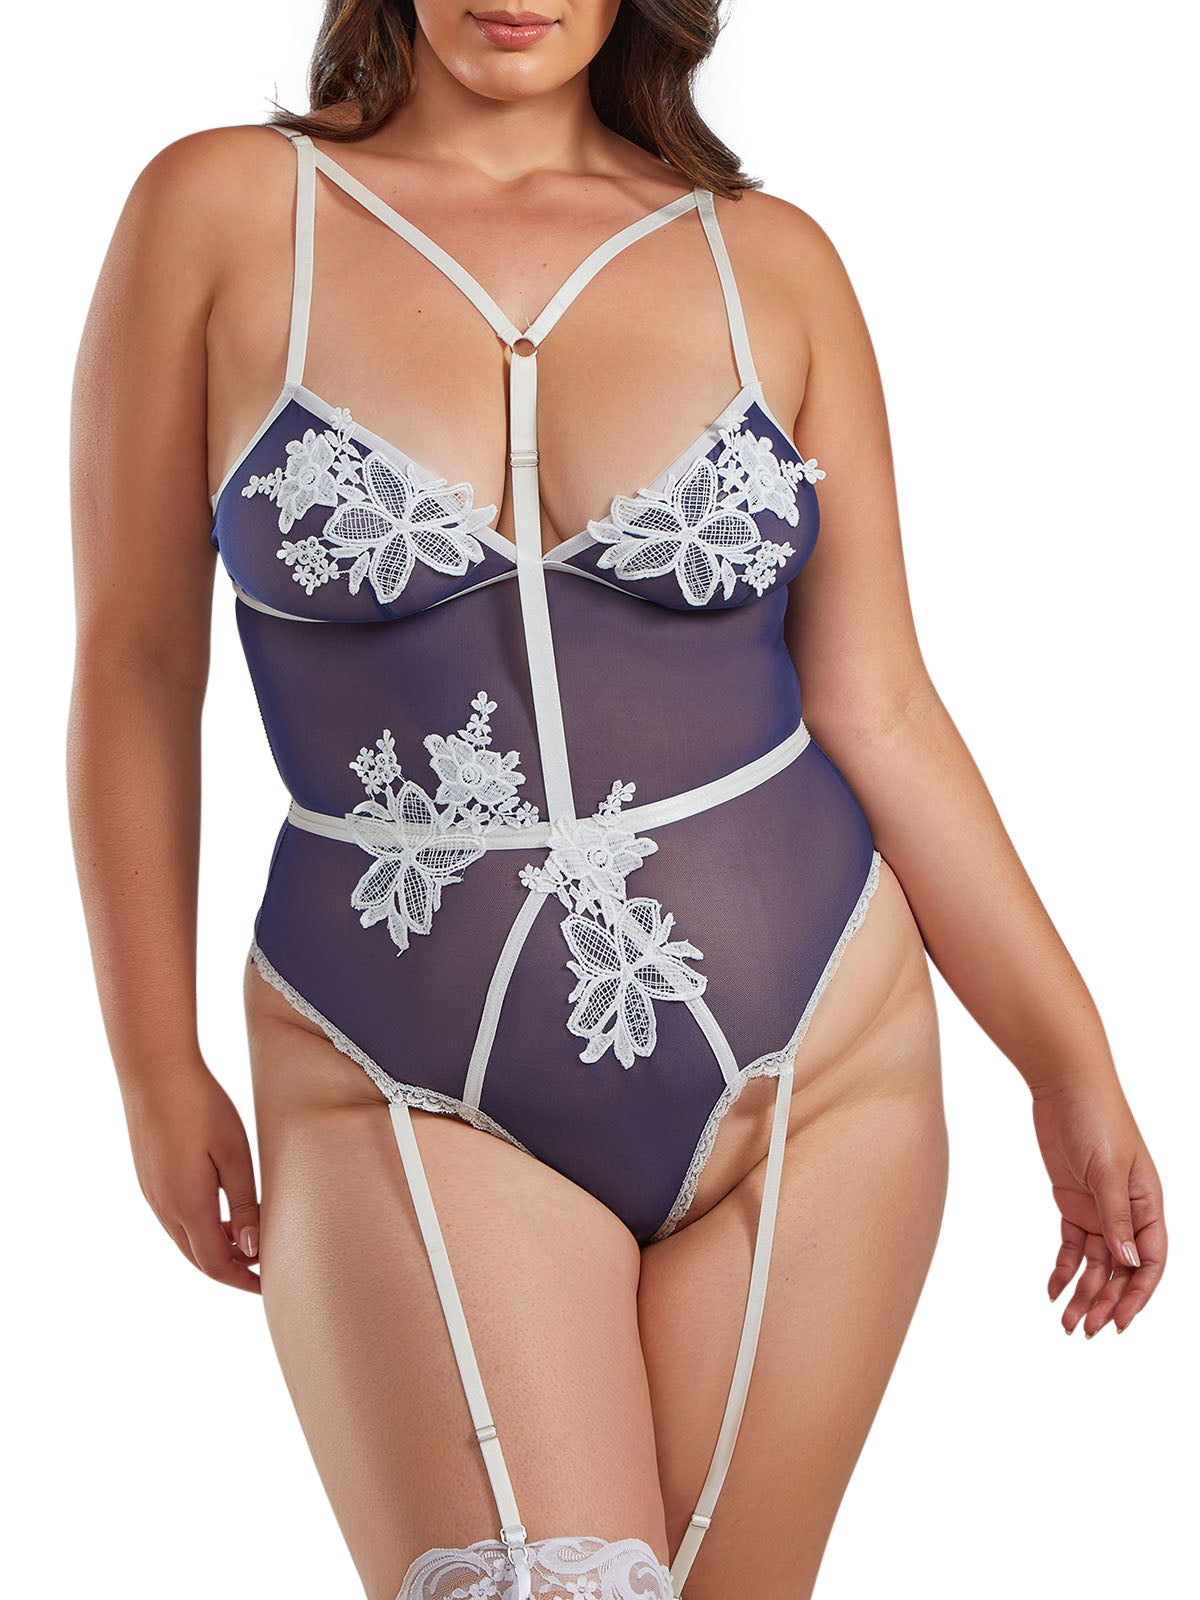 iCollection Plus Size Teddy Lingerie Alessandra Plus Size Teddy